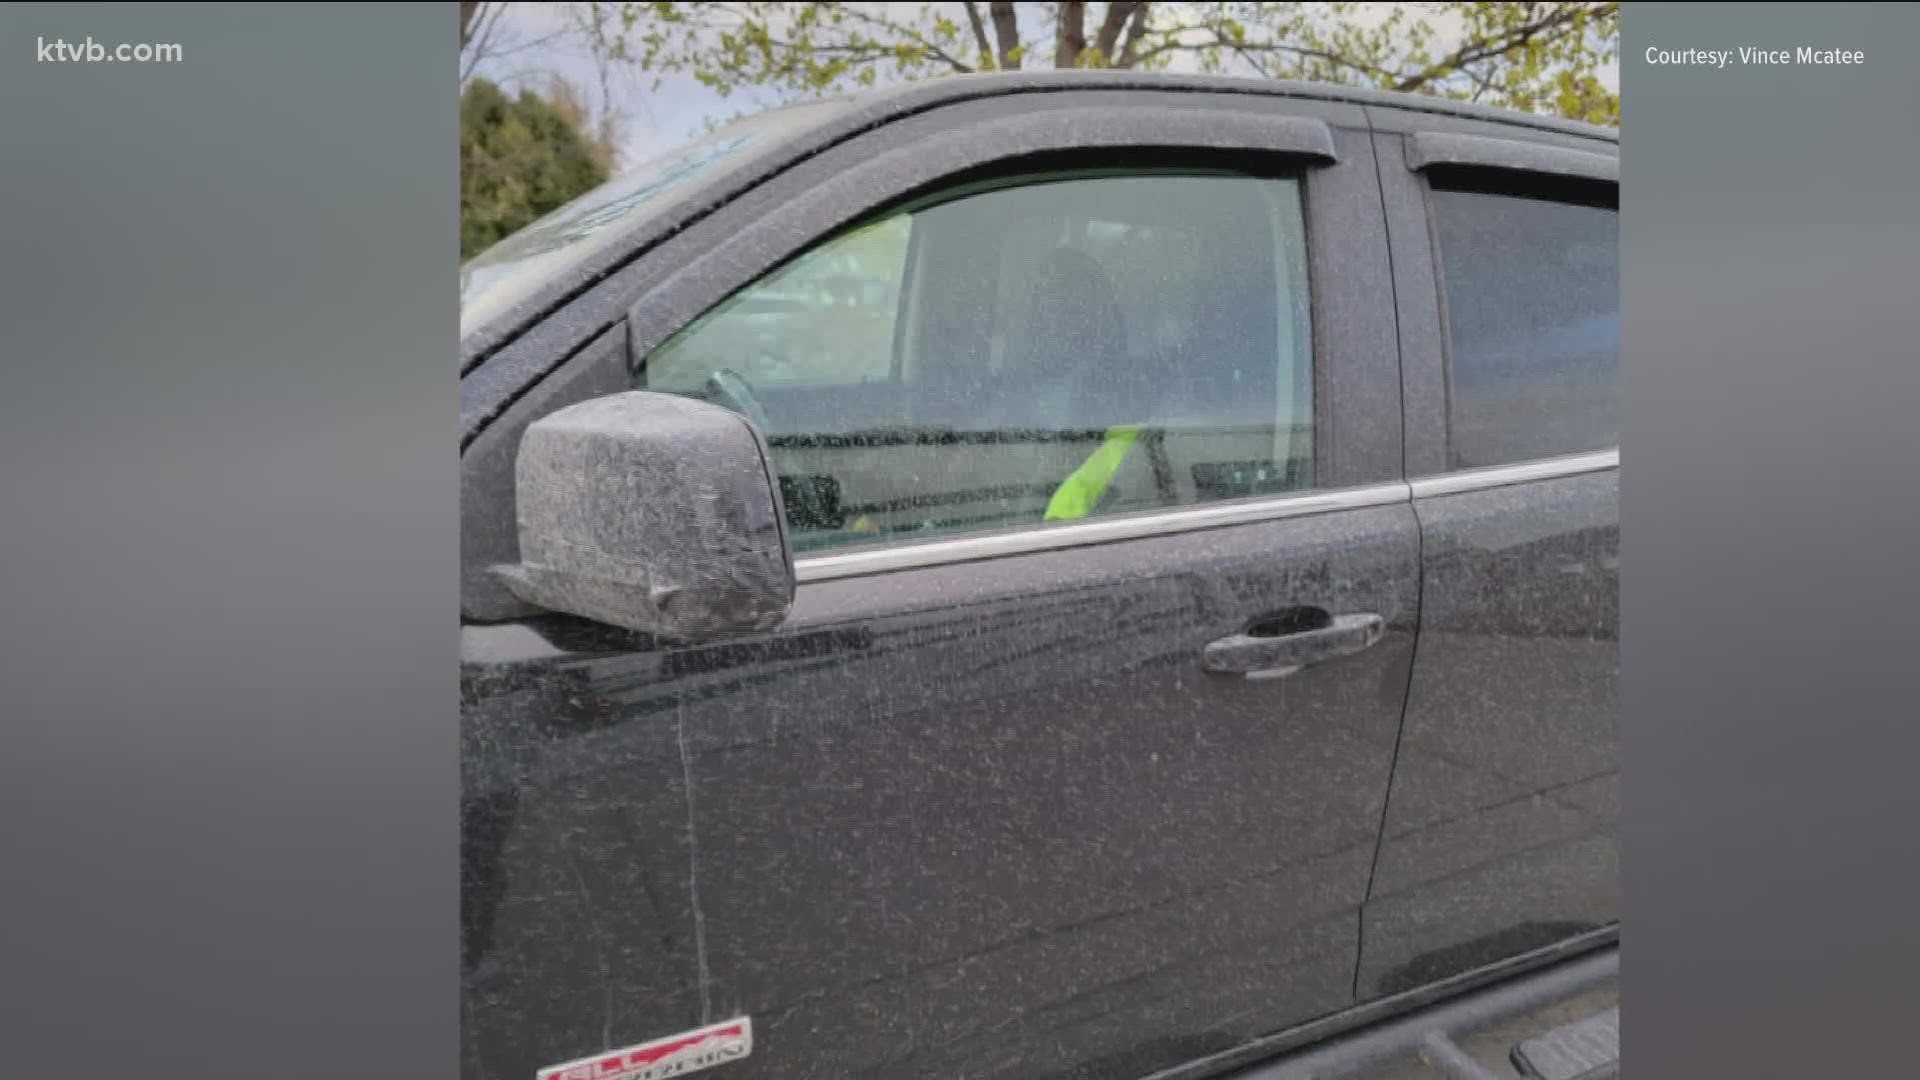 Mineral dust from a dried lake bed in southcentral Oregon traveled into the Treasure Valley due to Monday's strong winds, leaving cars in need of a wash Tuesday.